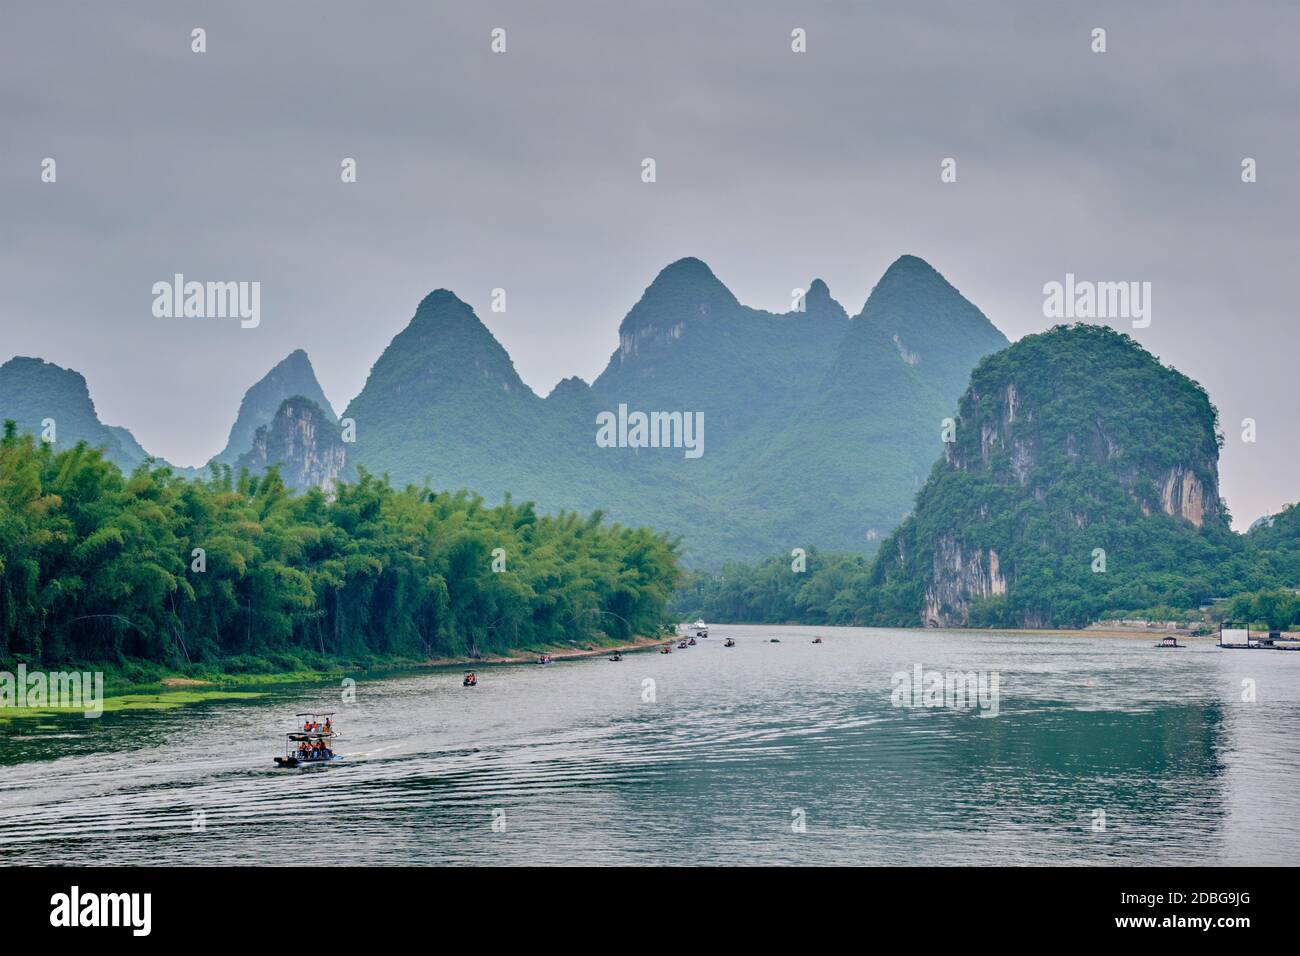 Tourist boats on Li river with dramatic karst mountain landscape in the background. Yangshuo, China Stock Photo